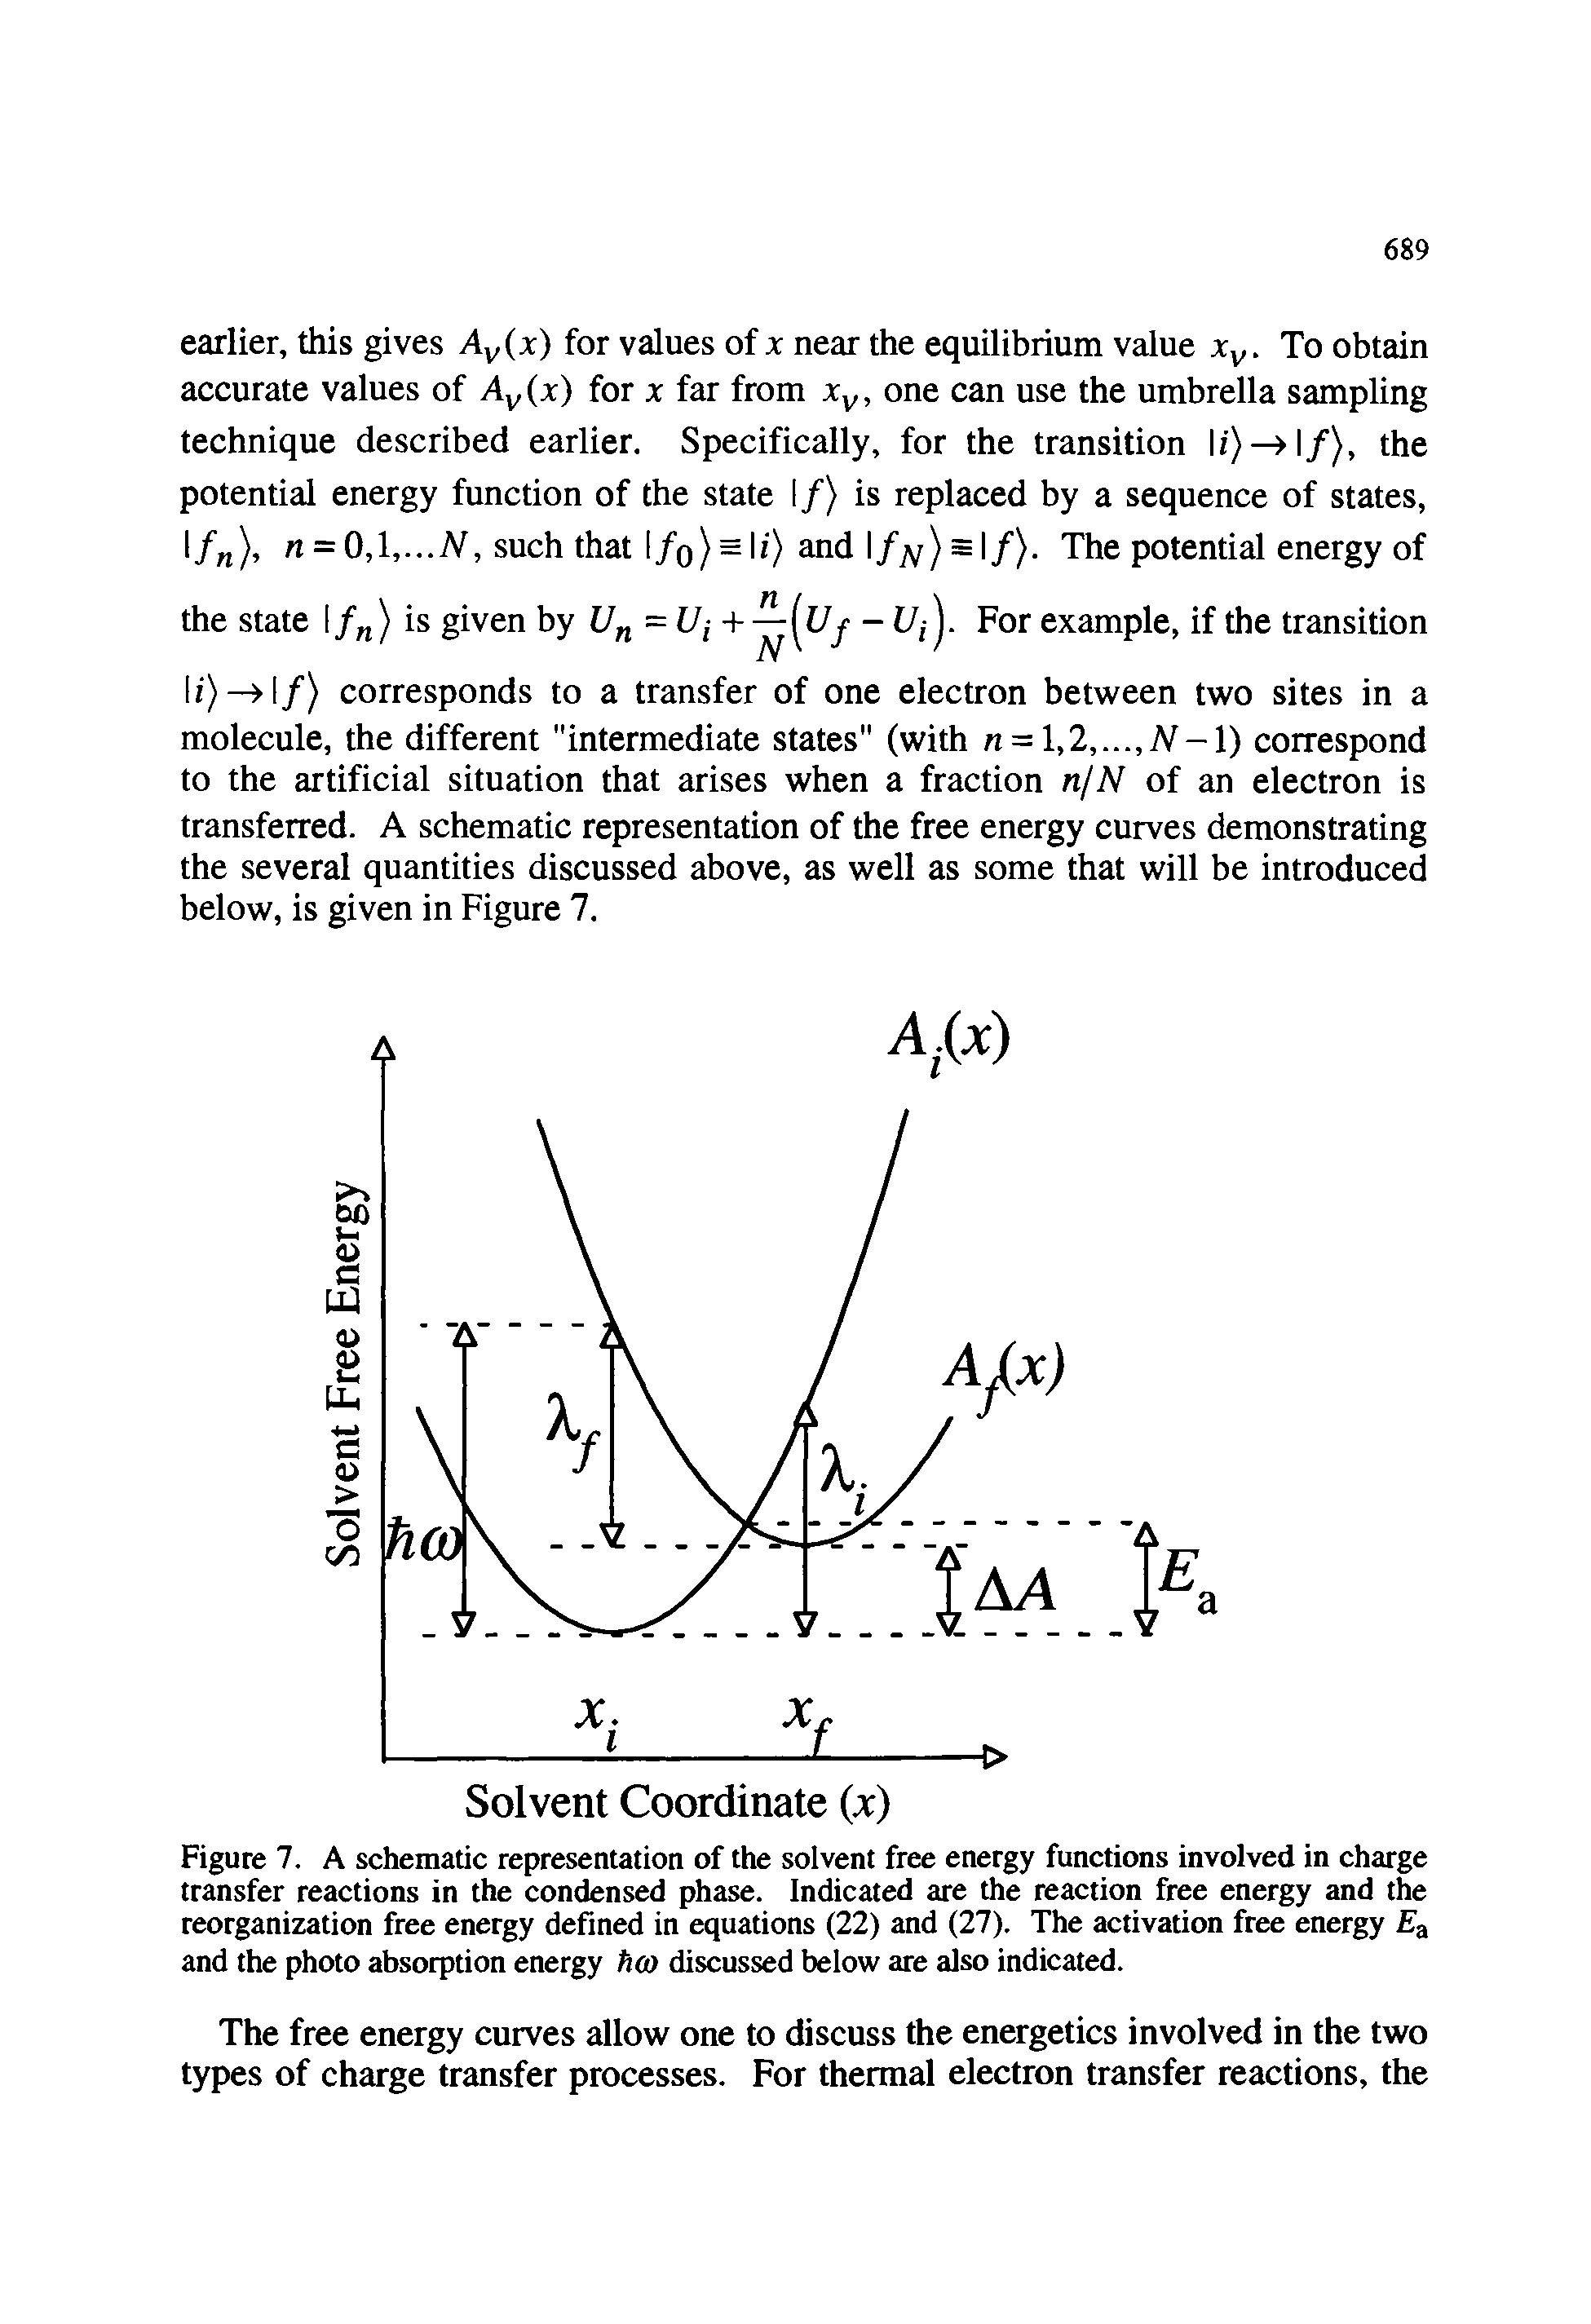 Figure 7. A schematic representation of the solvent free energy functions involved in charge transfer reactions in the condensed phase. Indicated are the reaction free energy and the reorganization free energy defined in equations (22) and (27). The activation free energy and the photo absorption energy hco discussed below are also indicated.